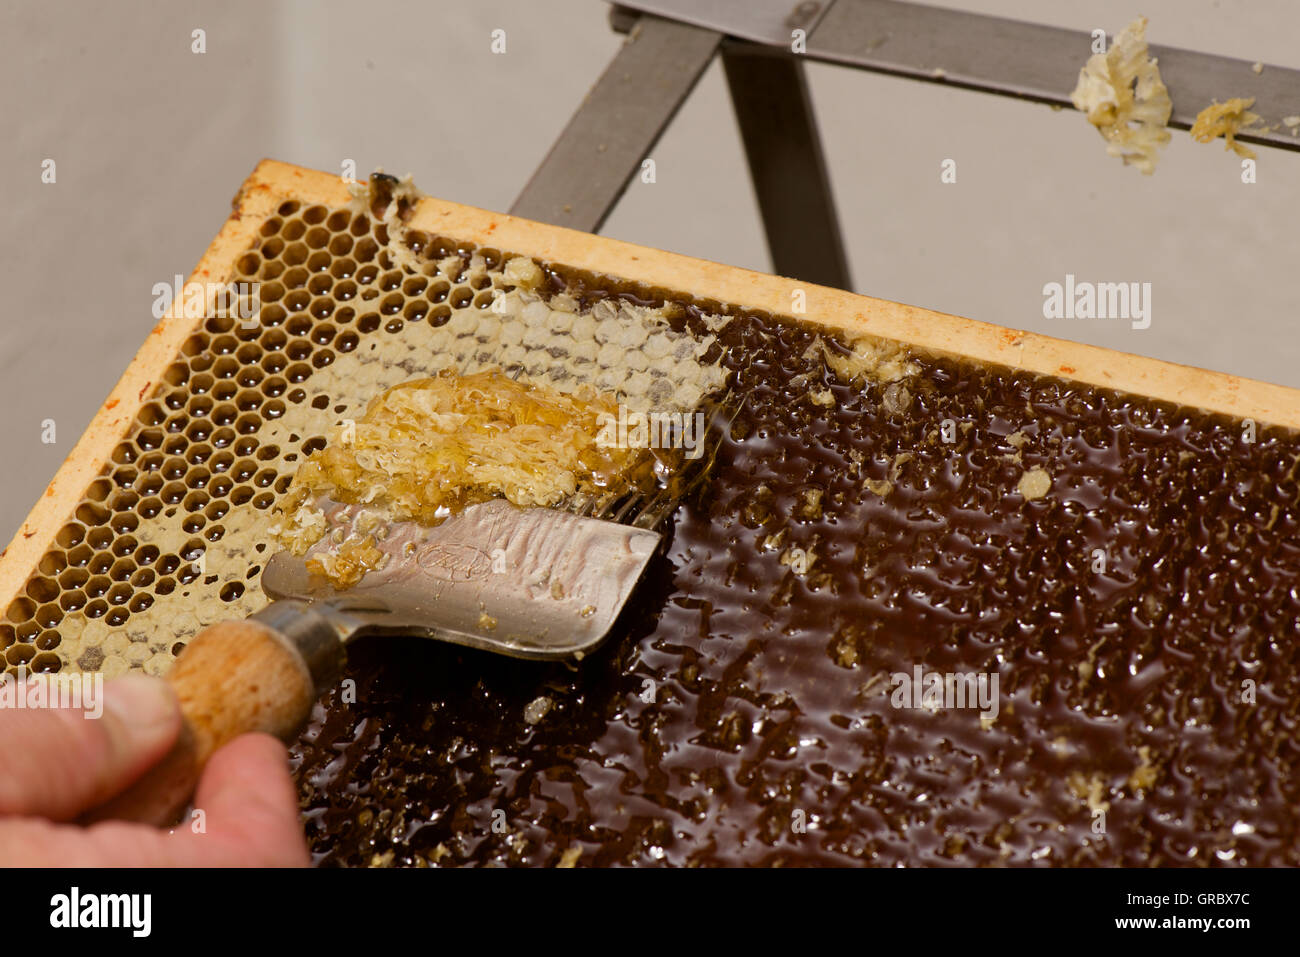 The Cells Of A Honeycomb Are Being Uncapped With Help Of An Uncapping Fork Stock Photo